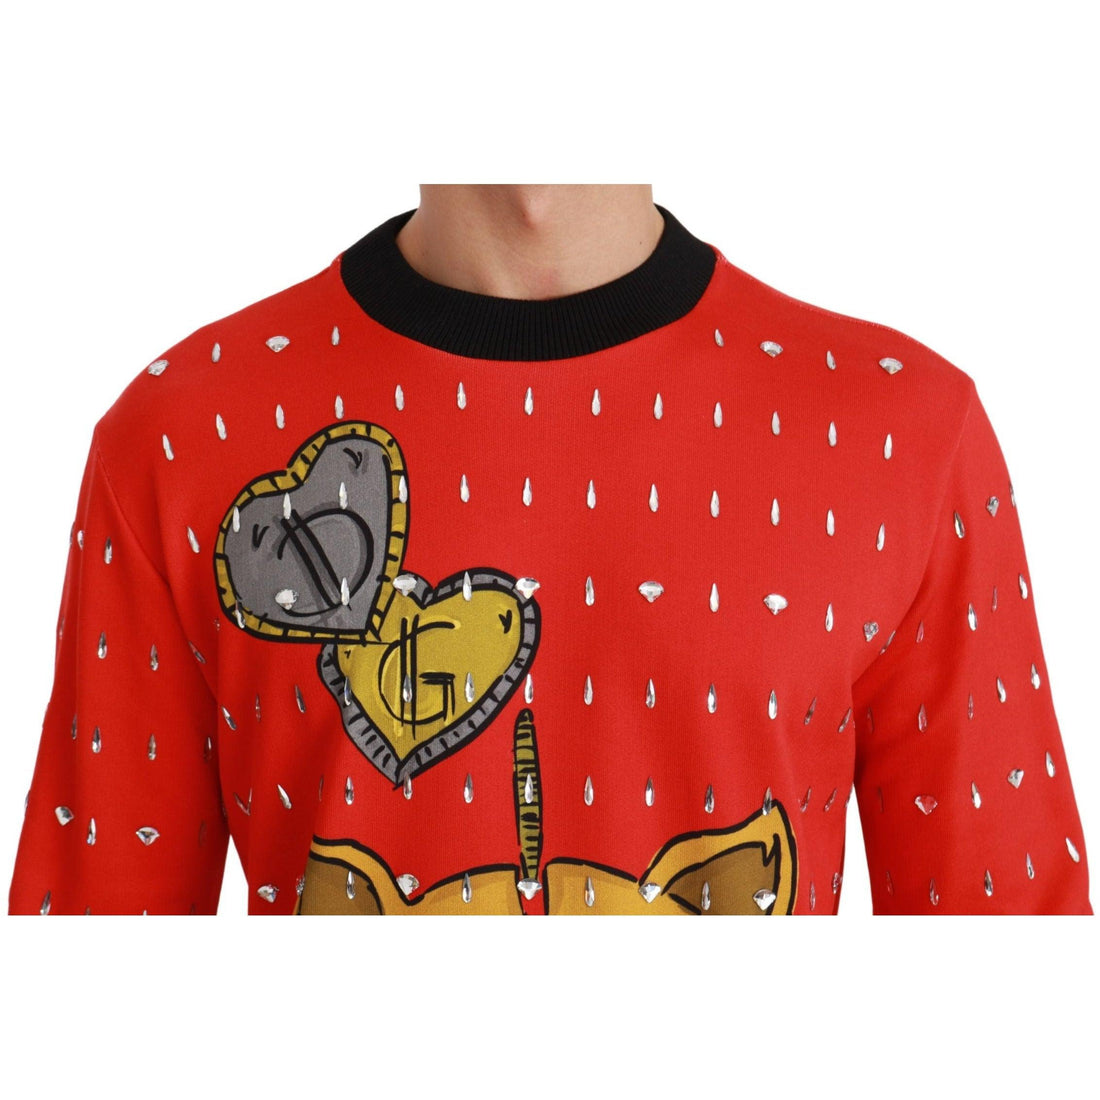 Dolce & Gabbana Red Crystal Pig of the Year Sweater - Paris Deluxe